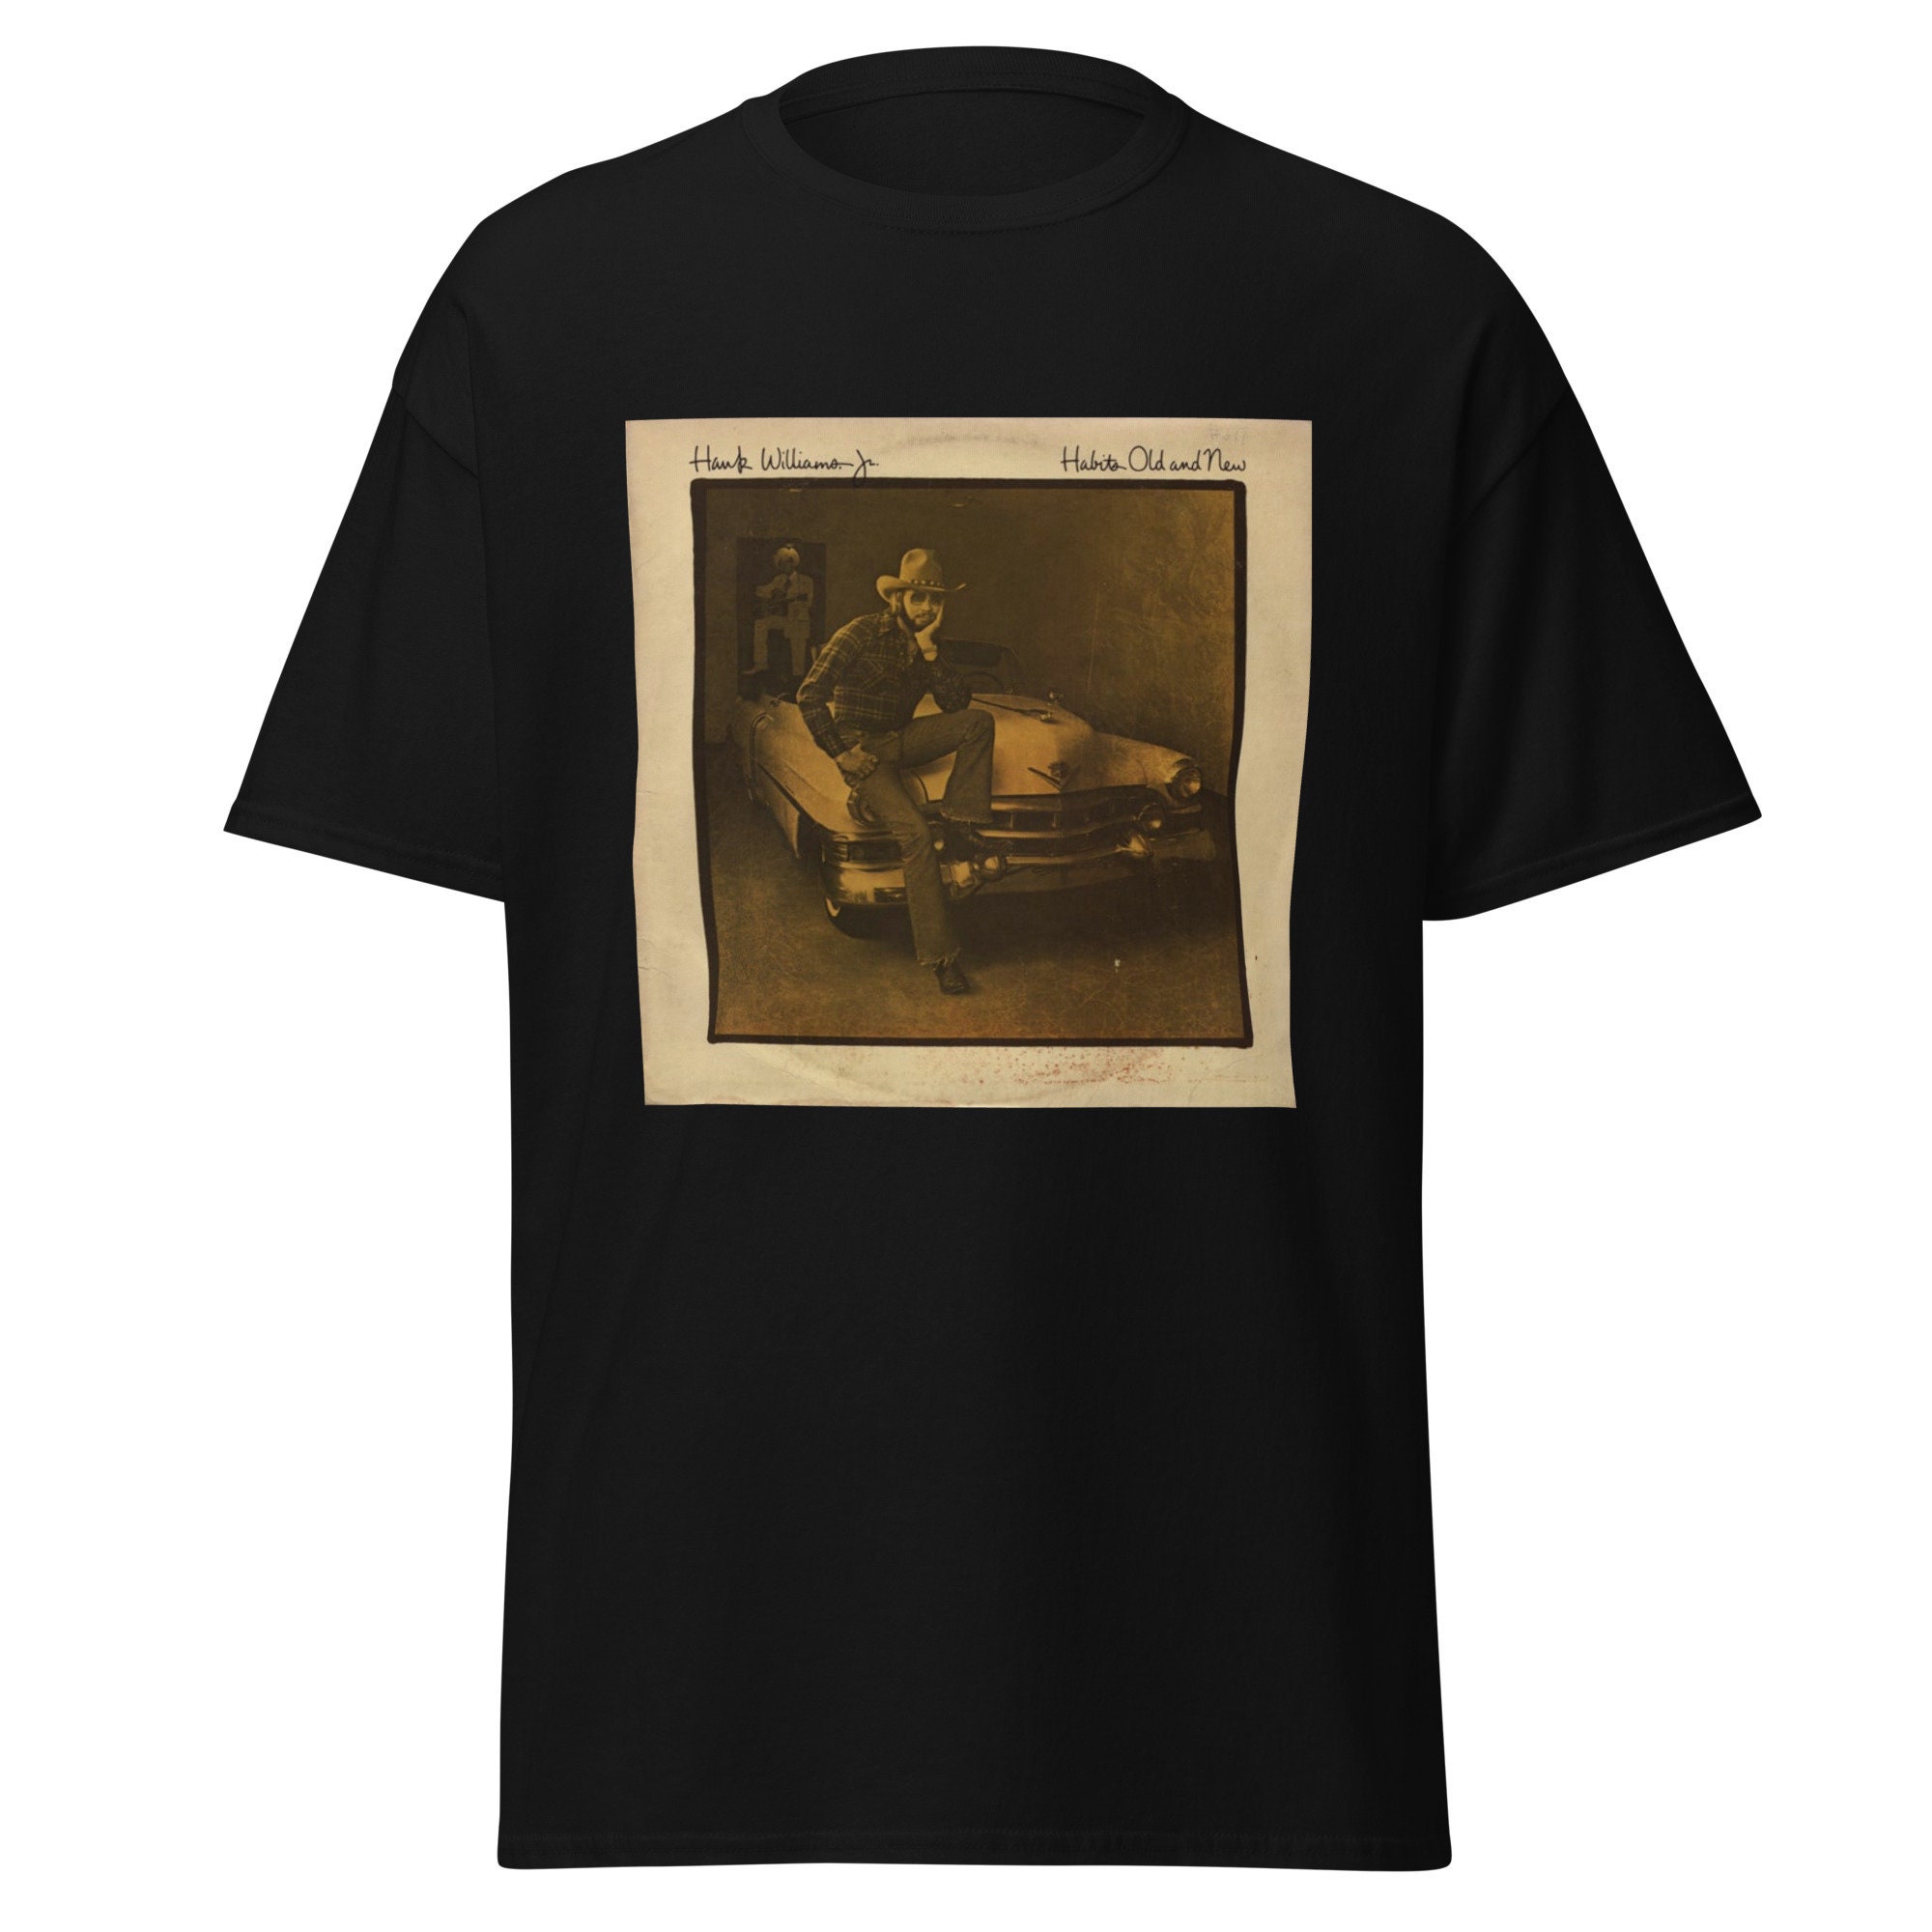 Hank Williams Jr Habits Old And New Album Picture Men's Classic Tee T-Shirt